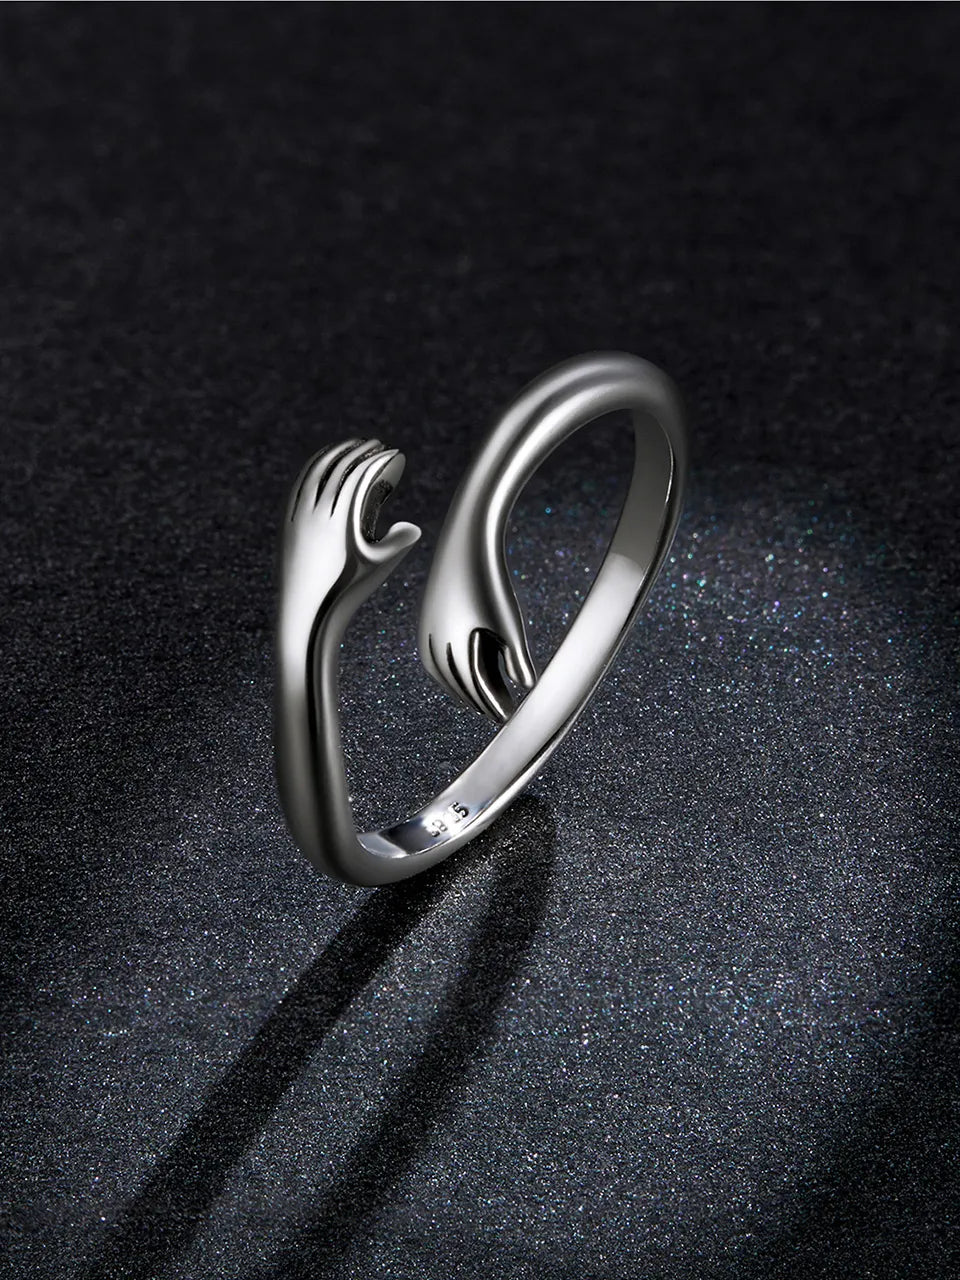 Love Hand Adjustable Ring for Women Ring 3 Colors